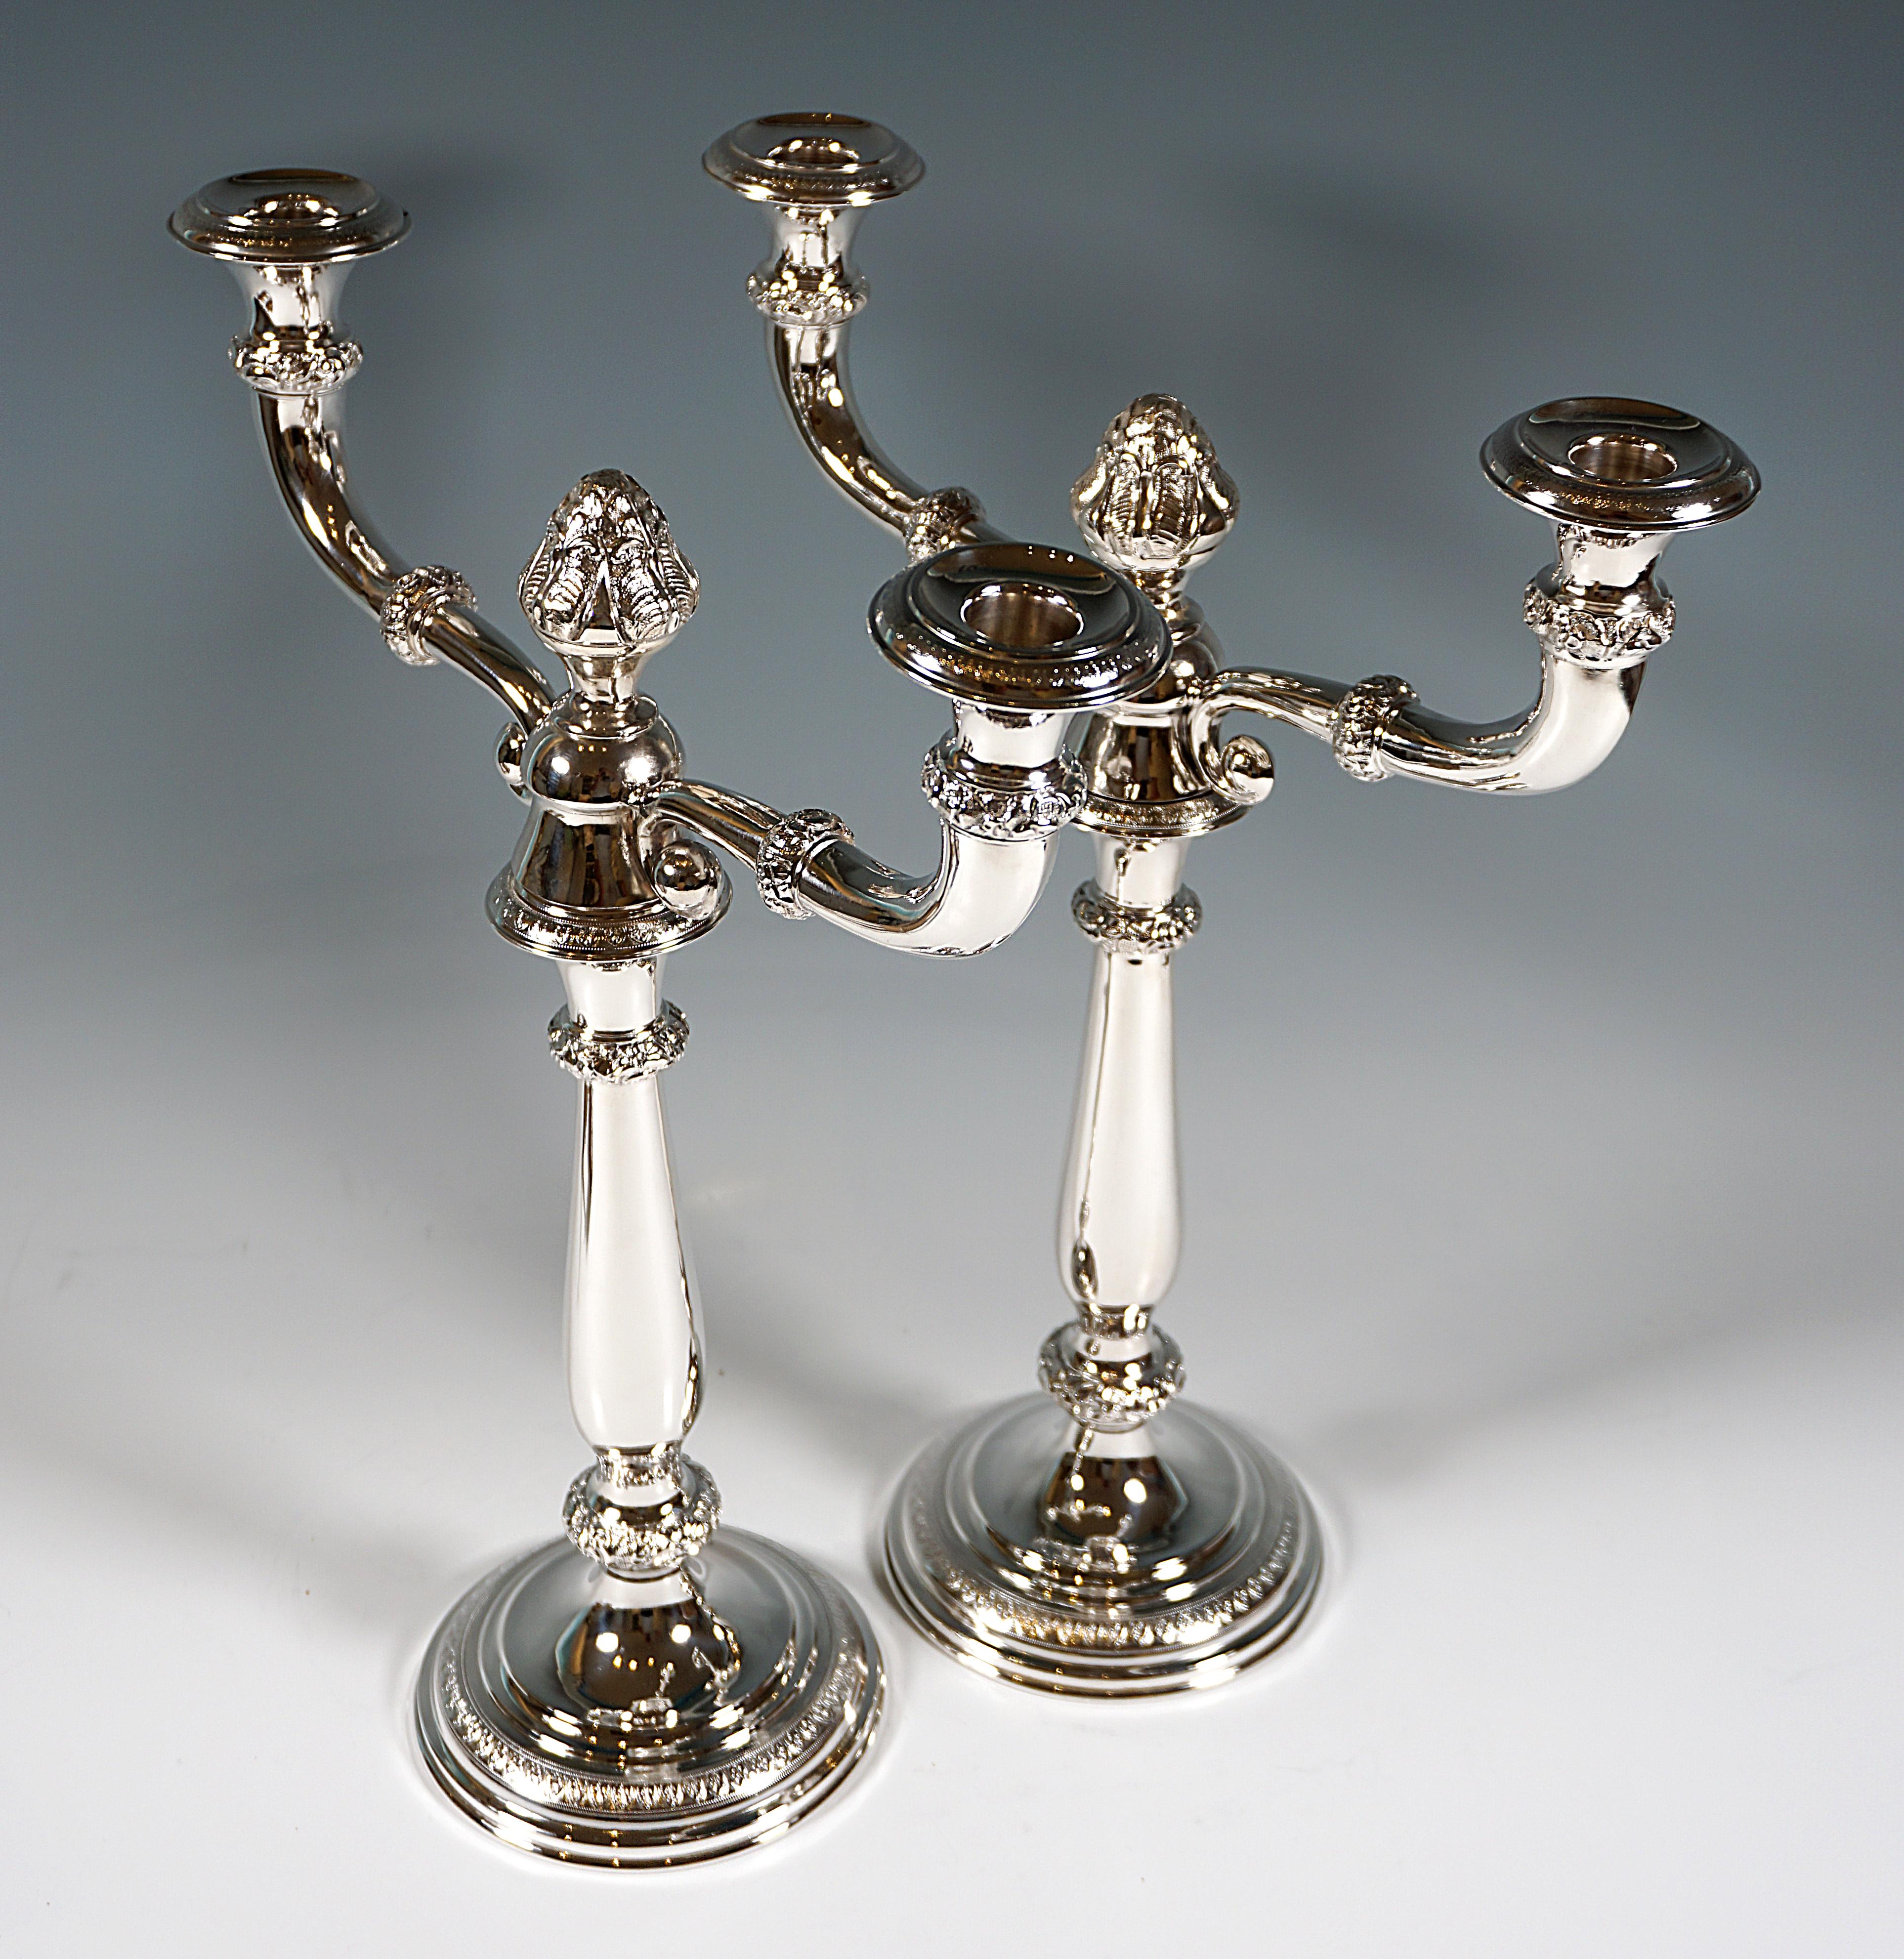 Two elegant silver candleholders on round stepped stand with palmette band, smooth baluster shaped stem, beaded rings decorated with sculpted floral & rocaille decor, vase shaped spouts with chased palmette decor on the high arched eaves pieces, can